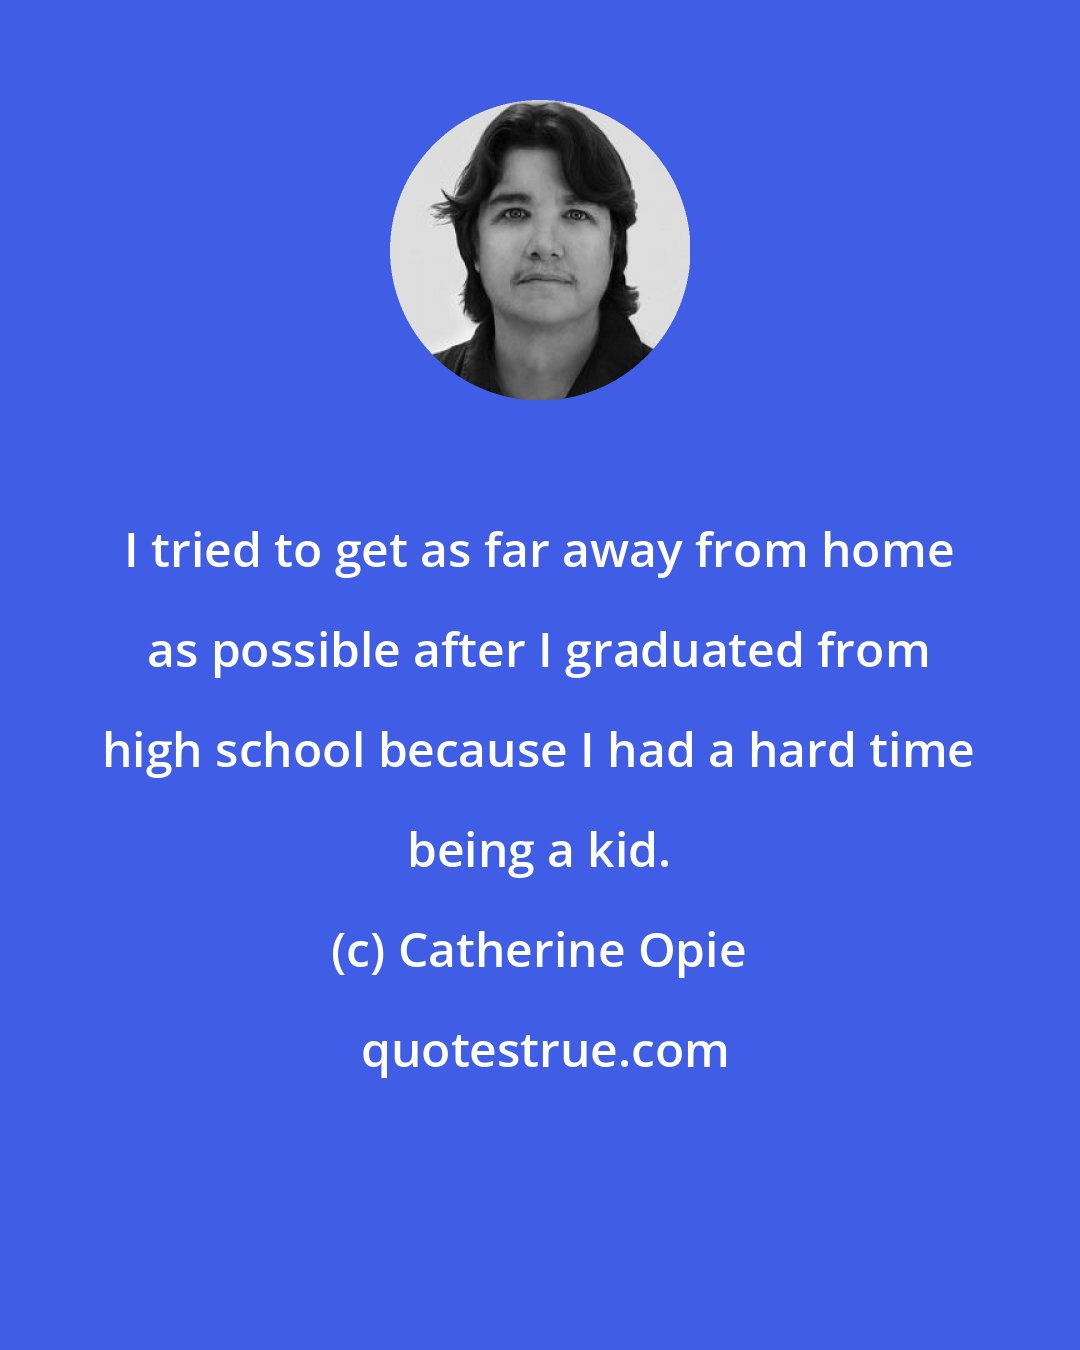 Catherine Opie: I tried to get as far away from home as possible after I graduated from high school because I had a hard time being a kid.